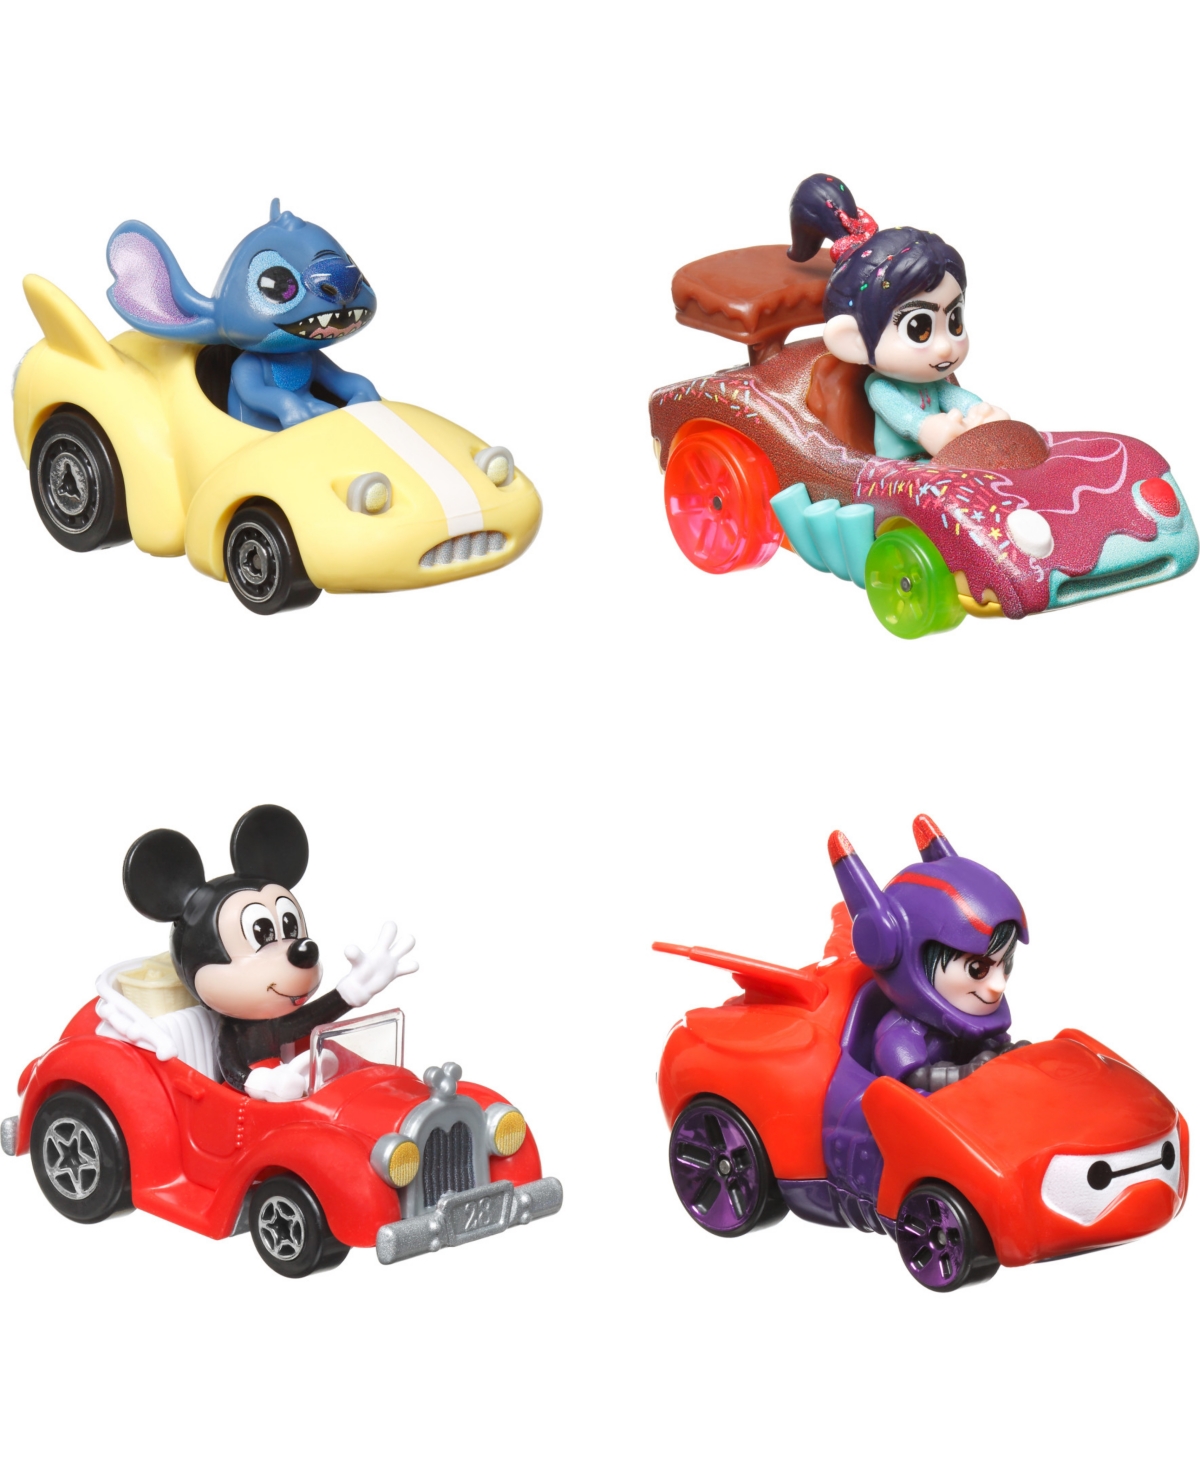 Hot Wheels Kids' Racerverse Set Of 4 Die-cast  Cars With Pop Culture Characters As Drivers Assortment Pack  In Multi-color